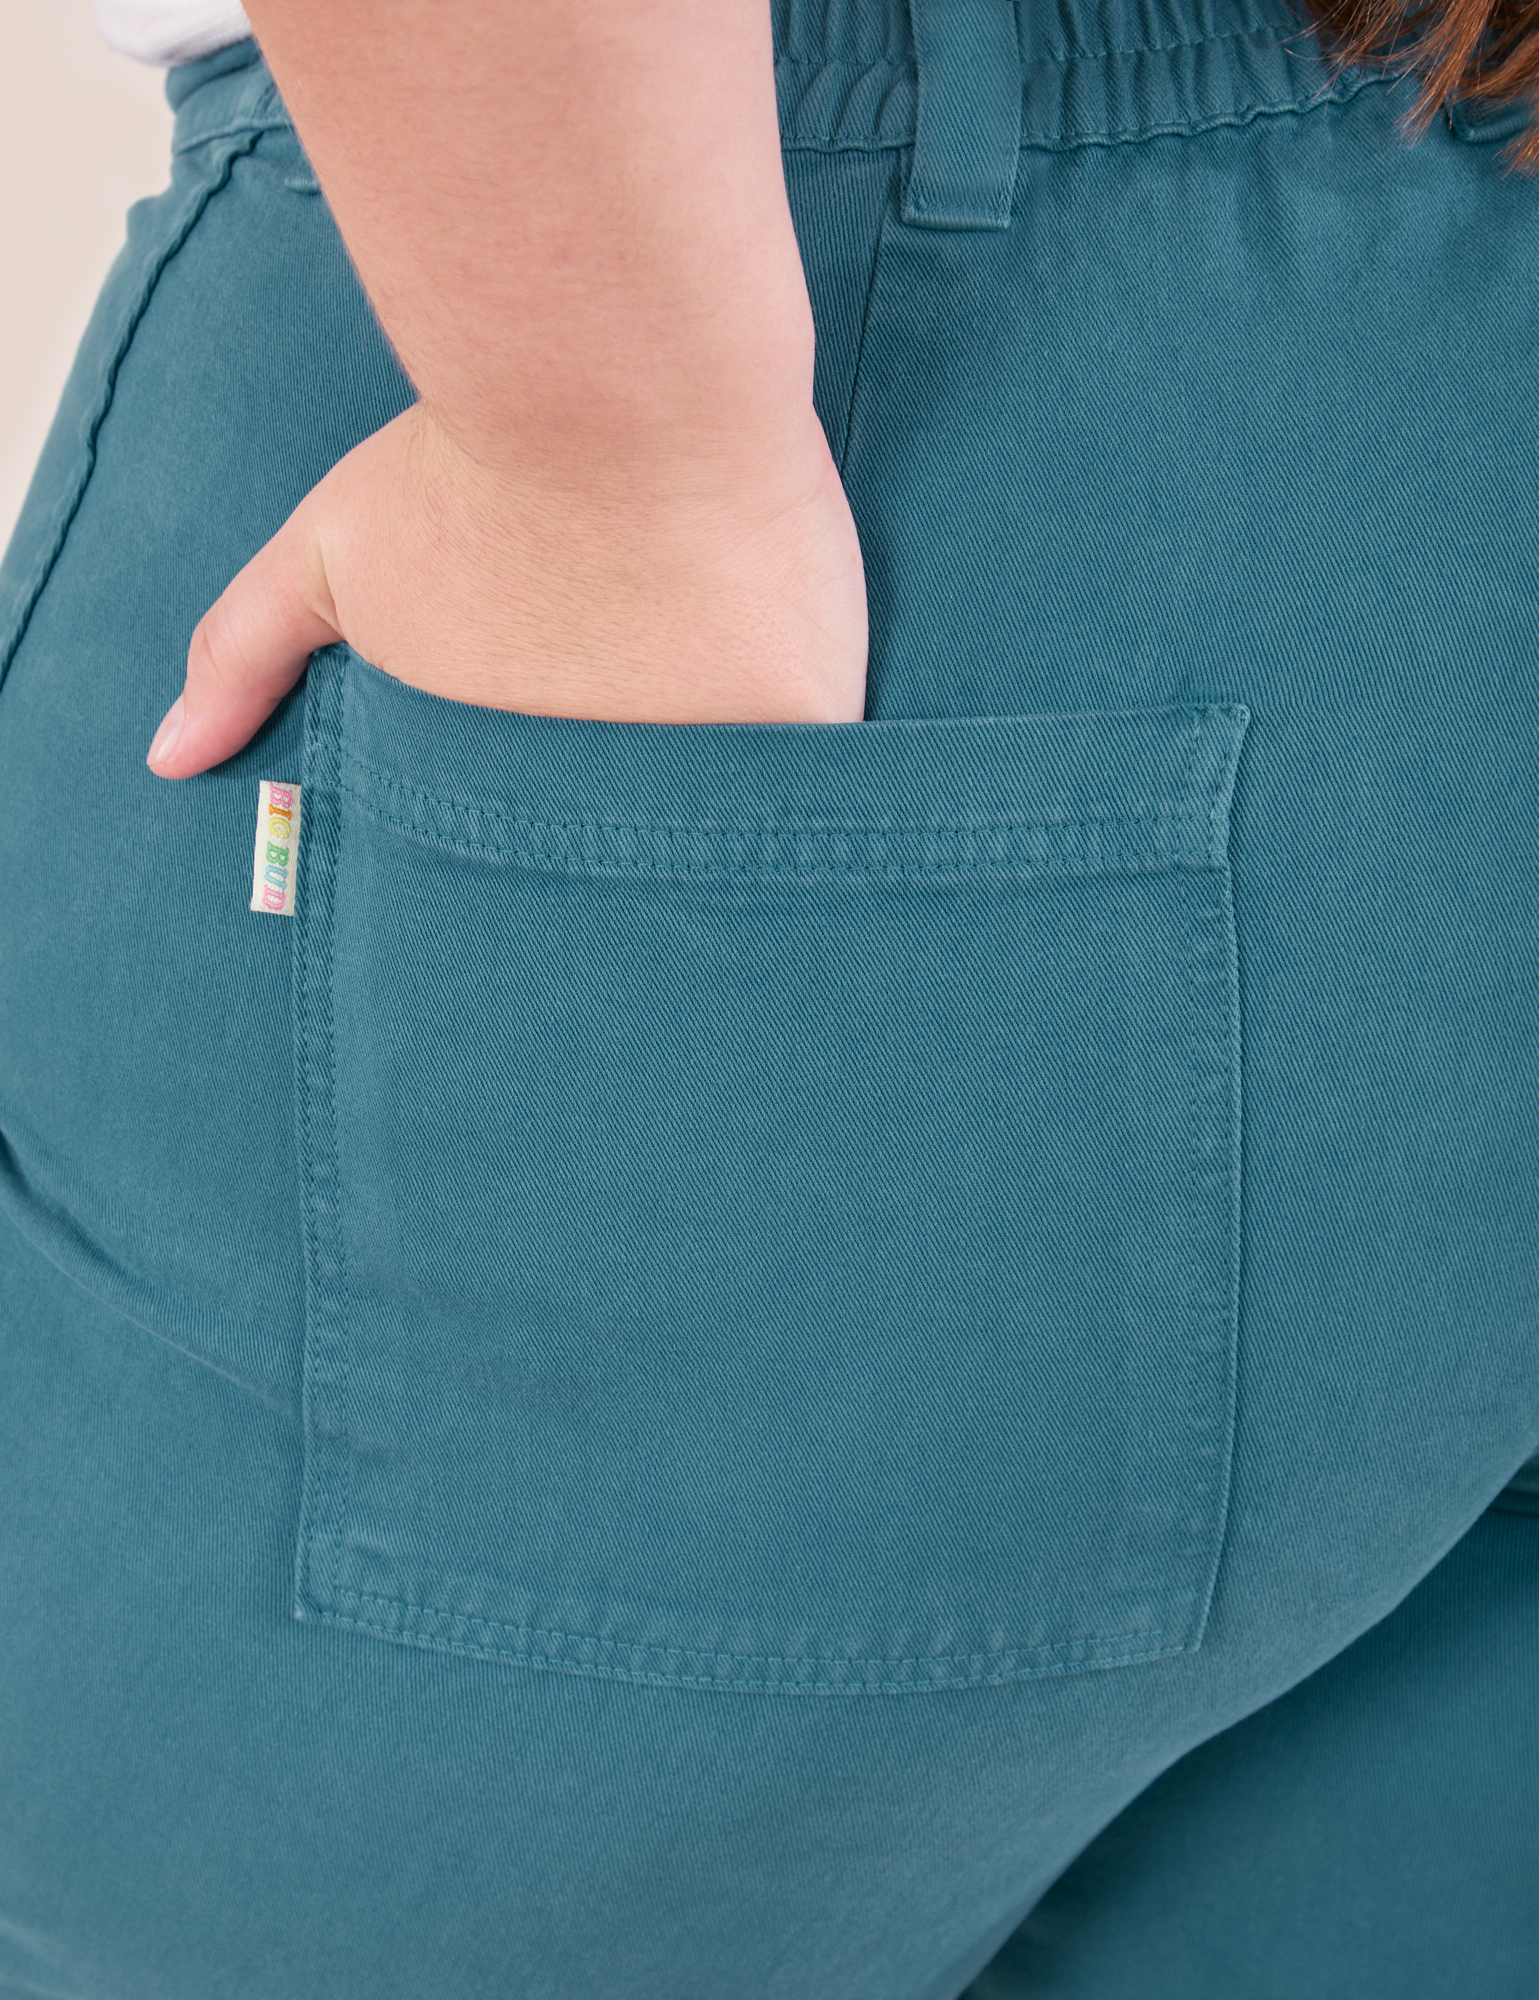 Bell Bottoms in Marine Blue back pocket close up. Marielena has her hand in the pocket.